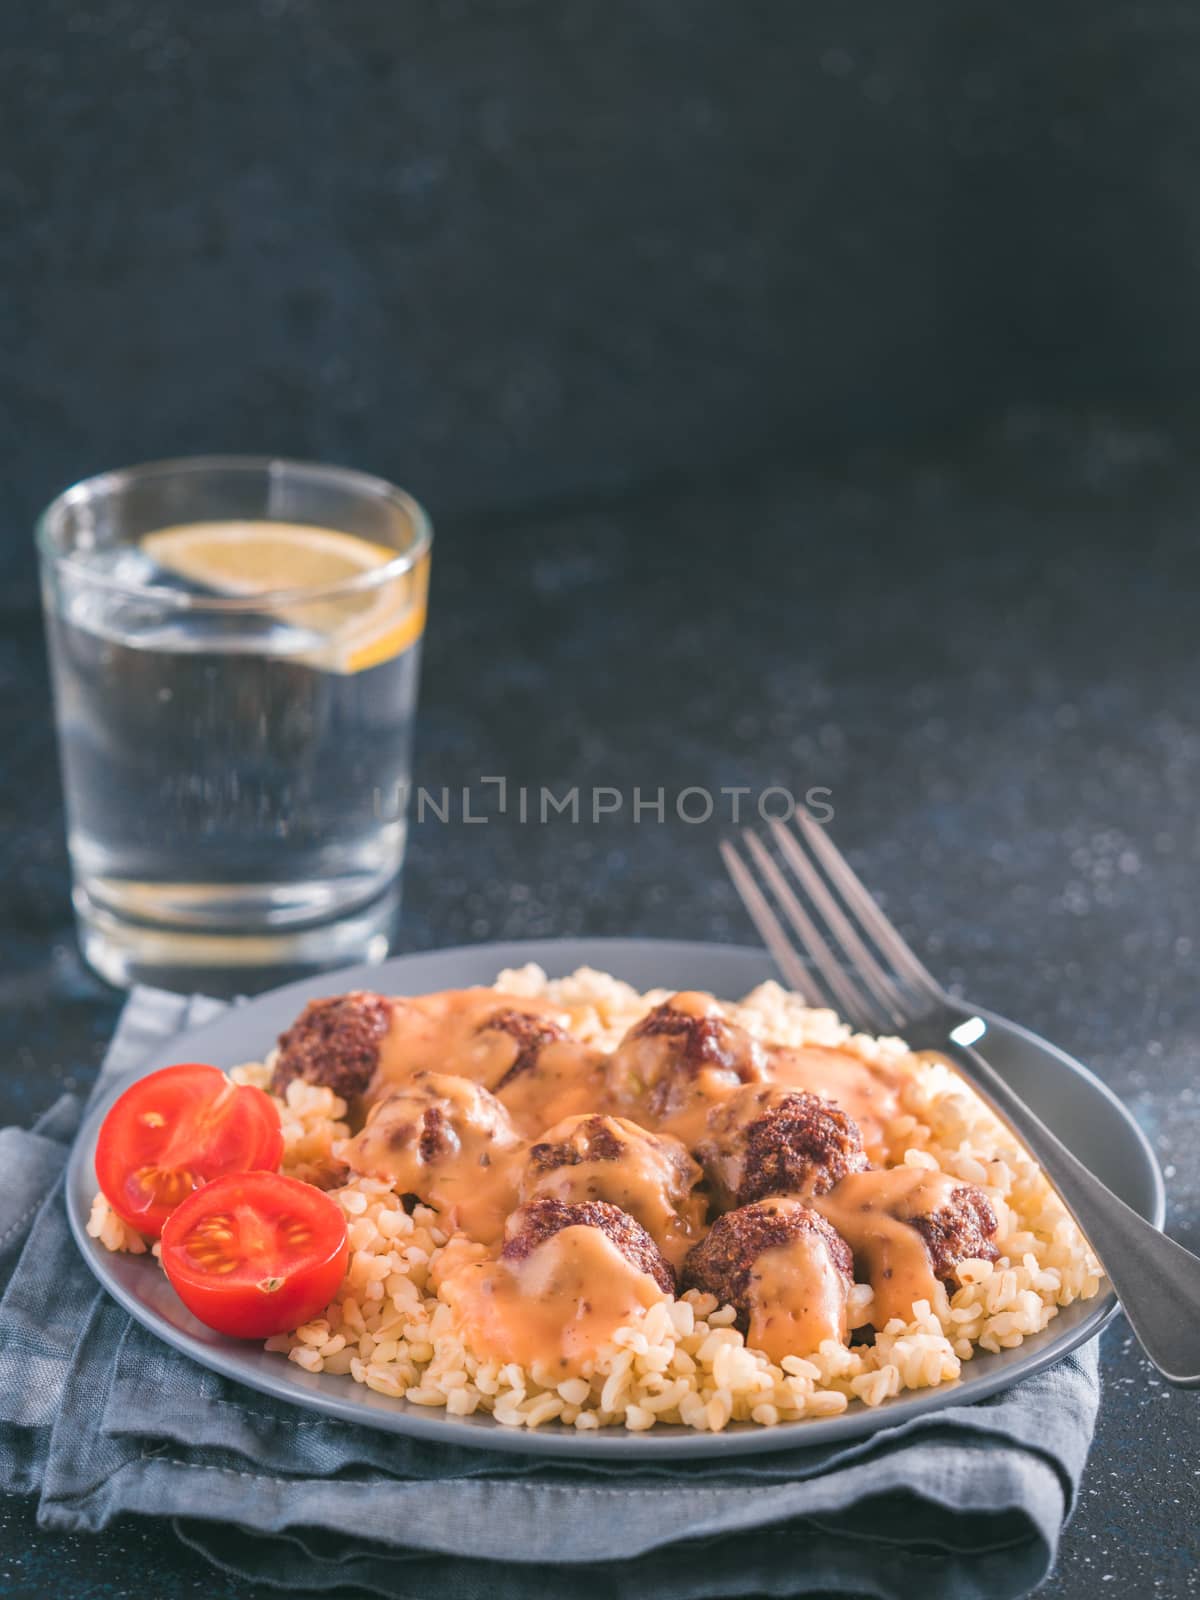 Bulgur and meatball in plate by fascinadora